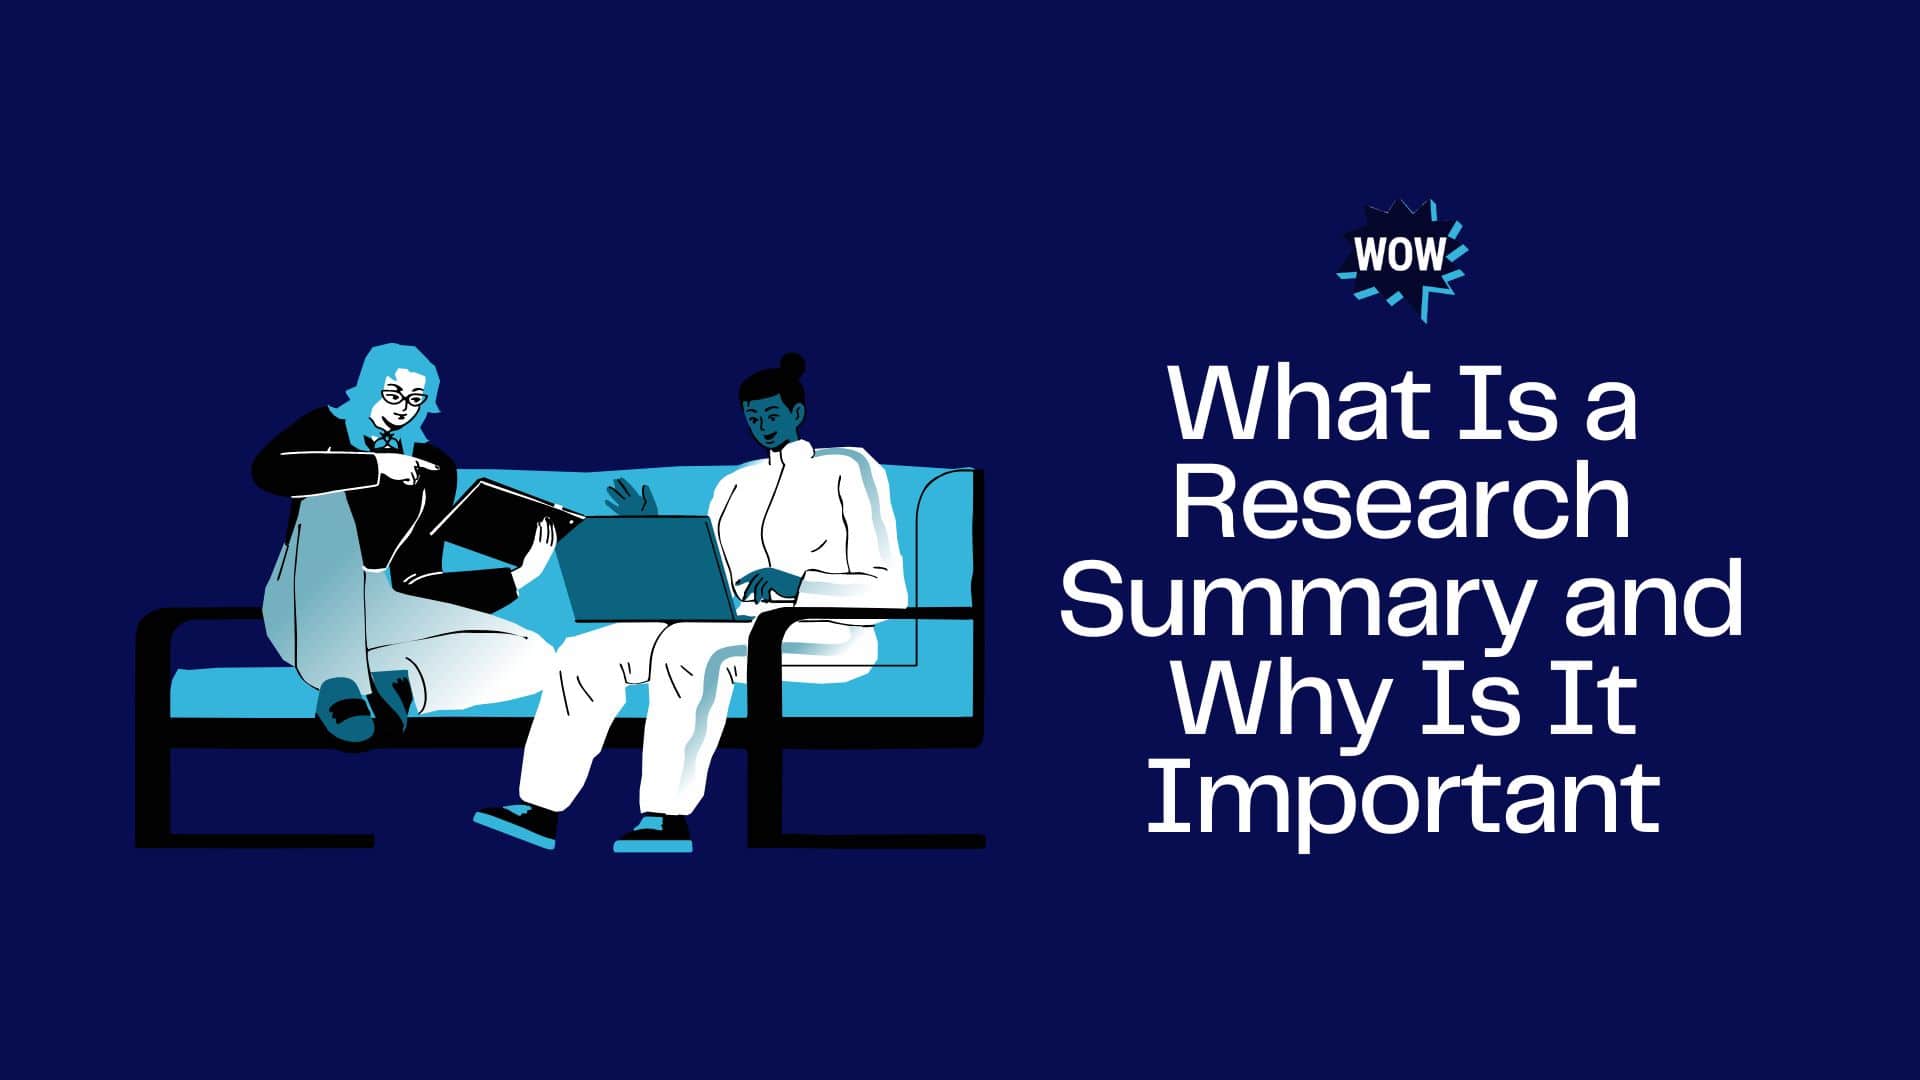 What Is a Research Summary and Why Is It Important